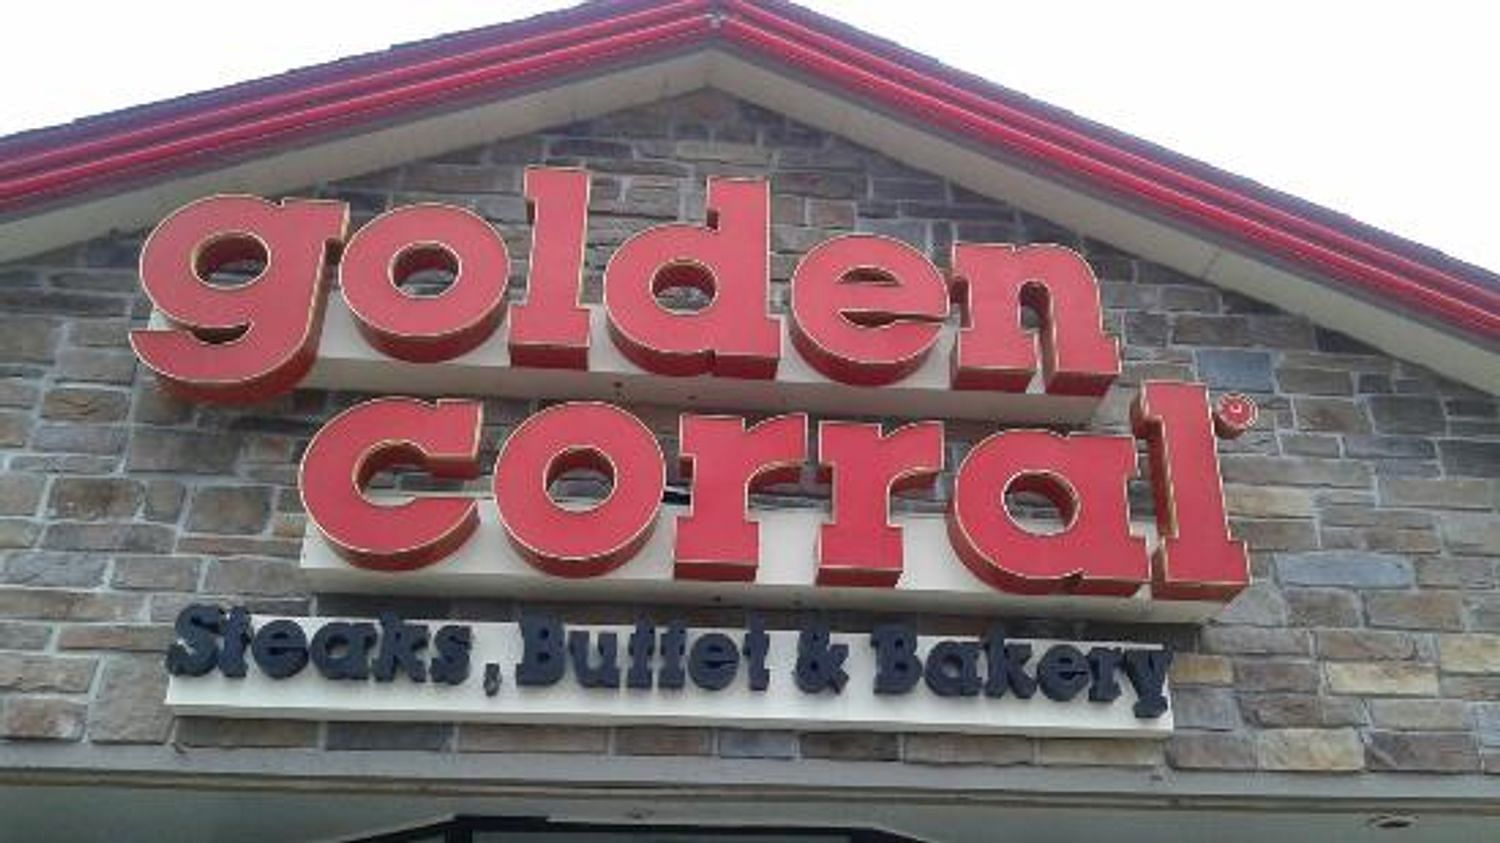 Golden Corral food fight brawl video takes over the internet as Bensalem police investigate